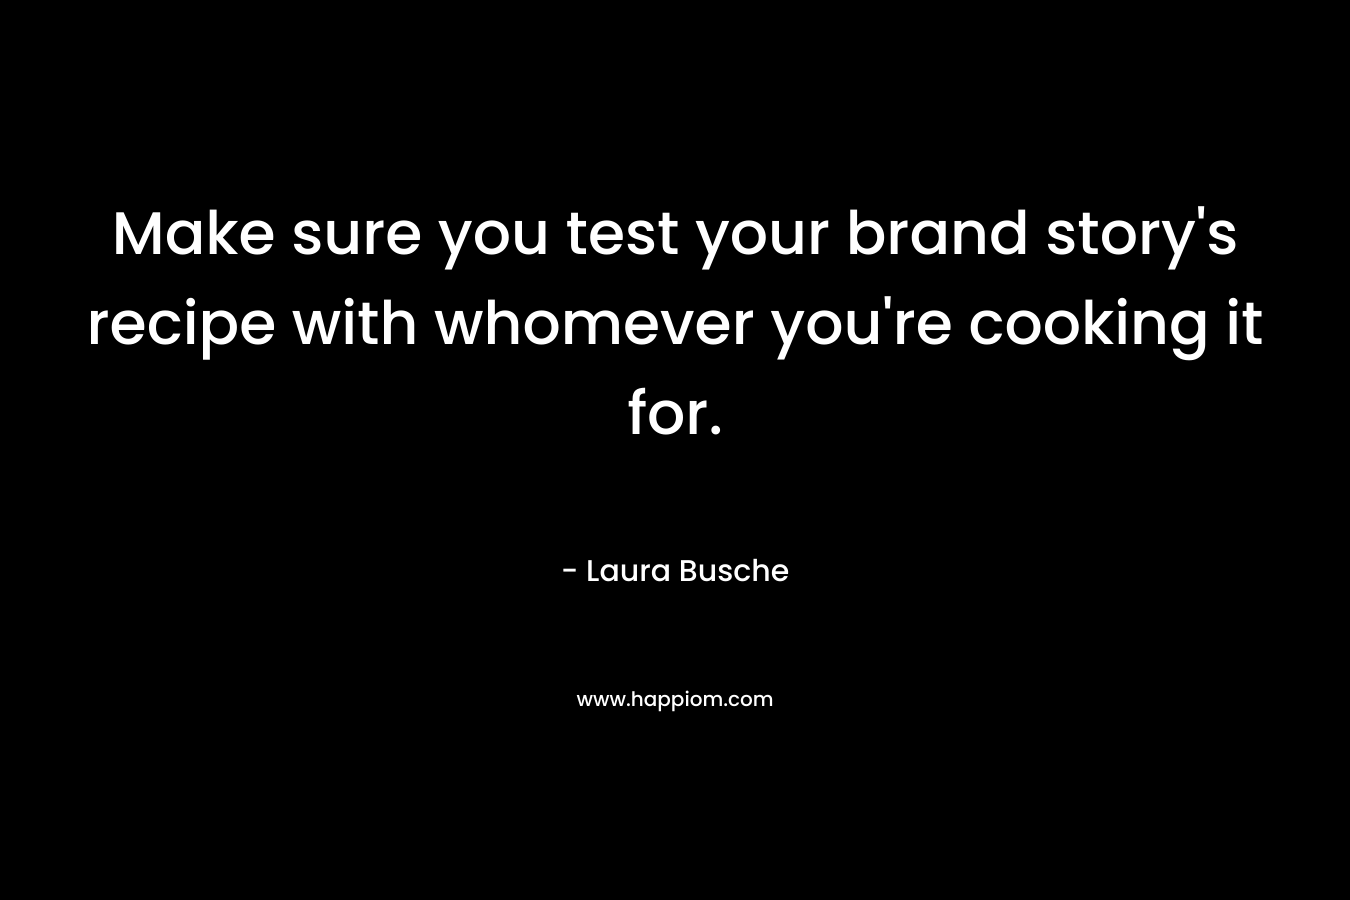 Make sure you test your brand story’s recipe with whomever you’re cooking it for. – Laura Busche